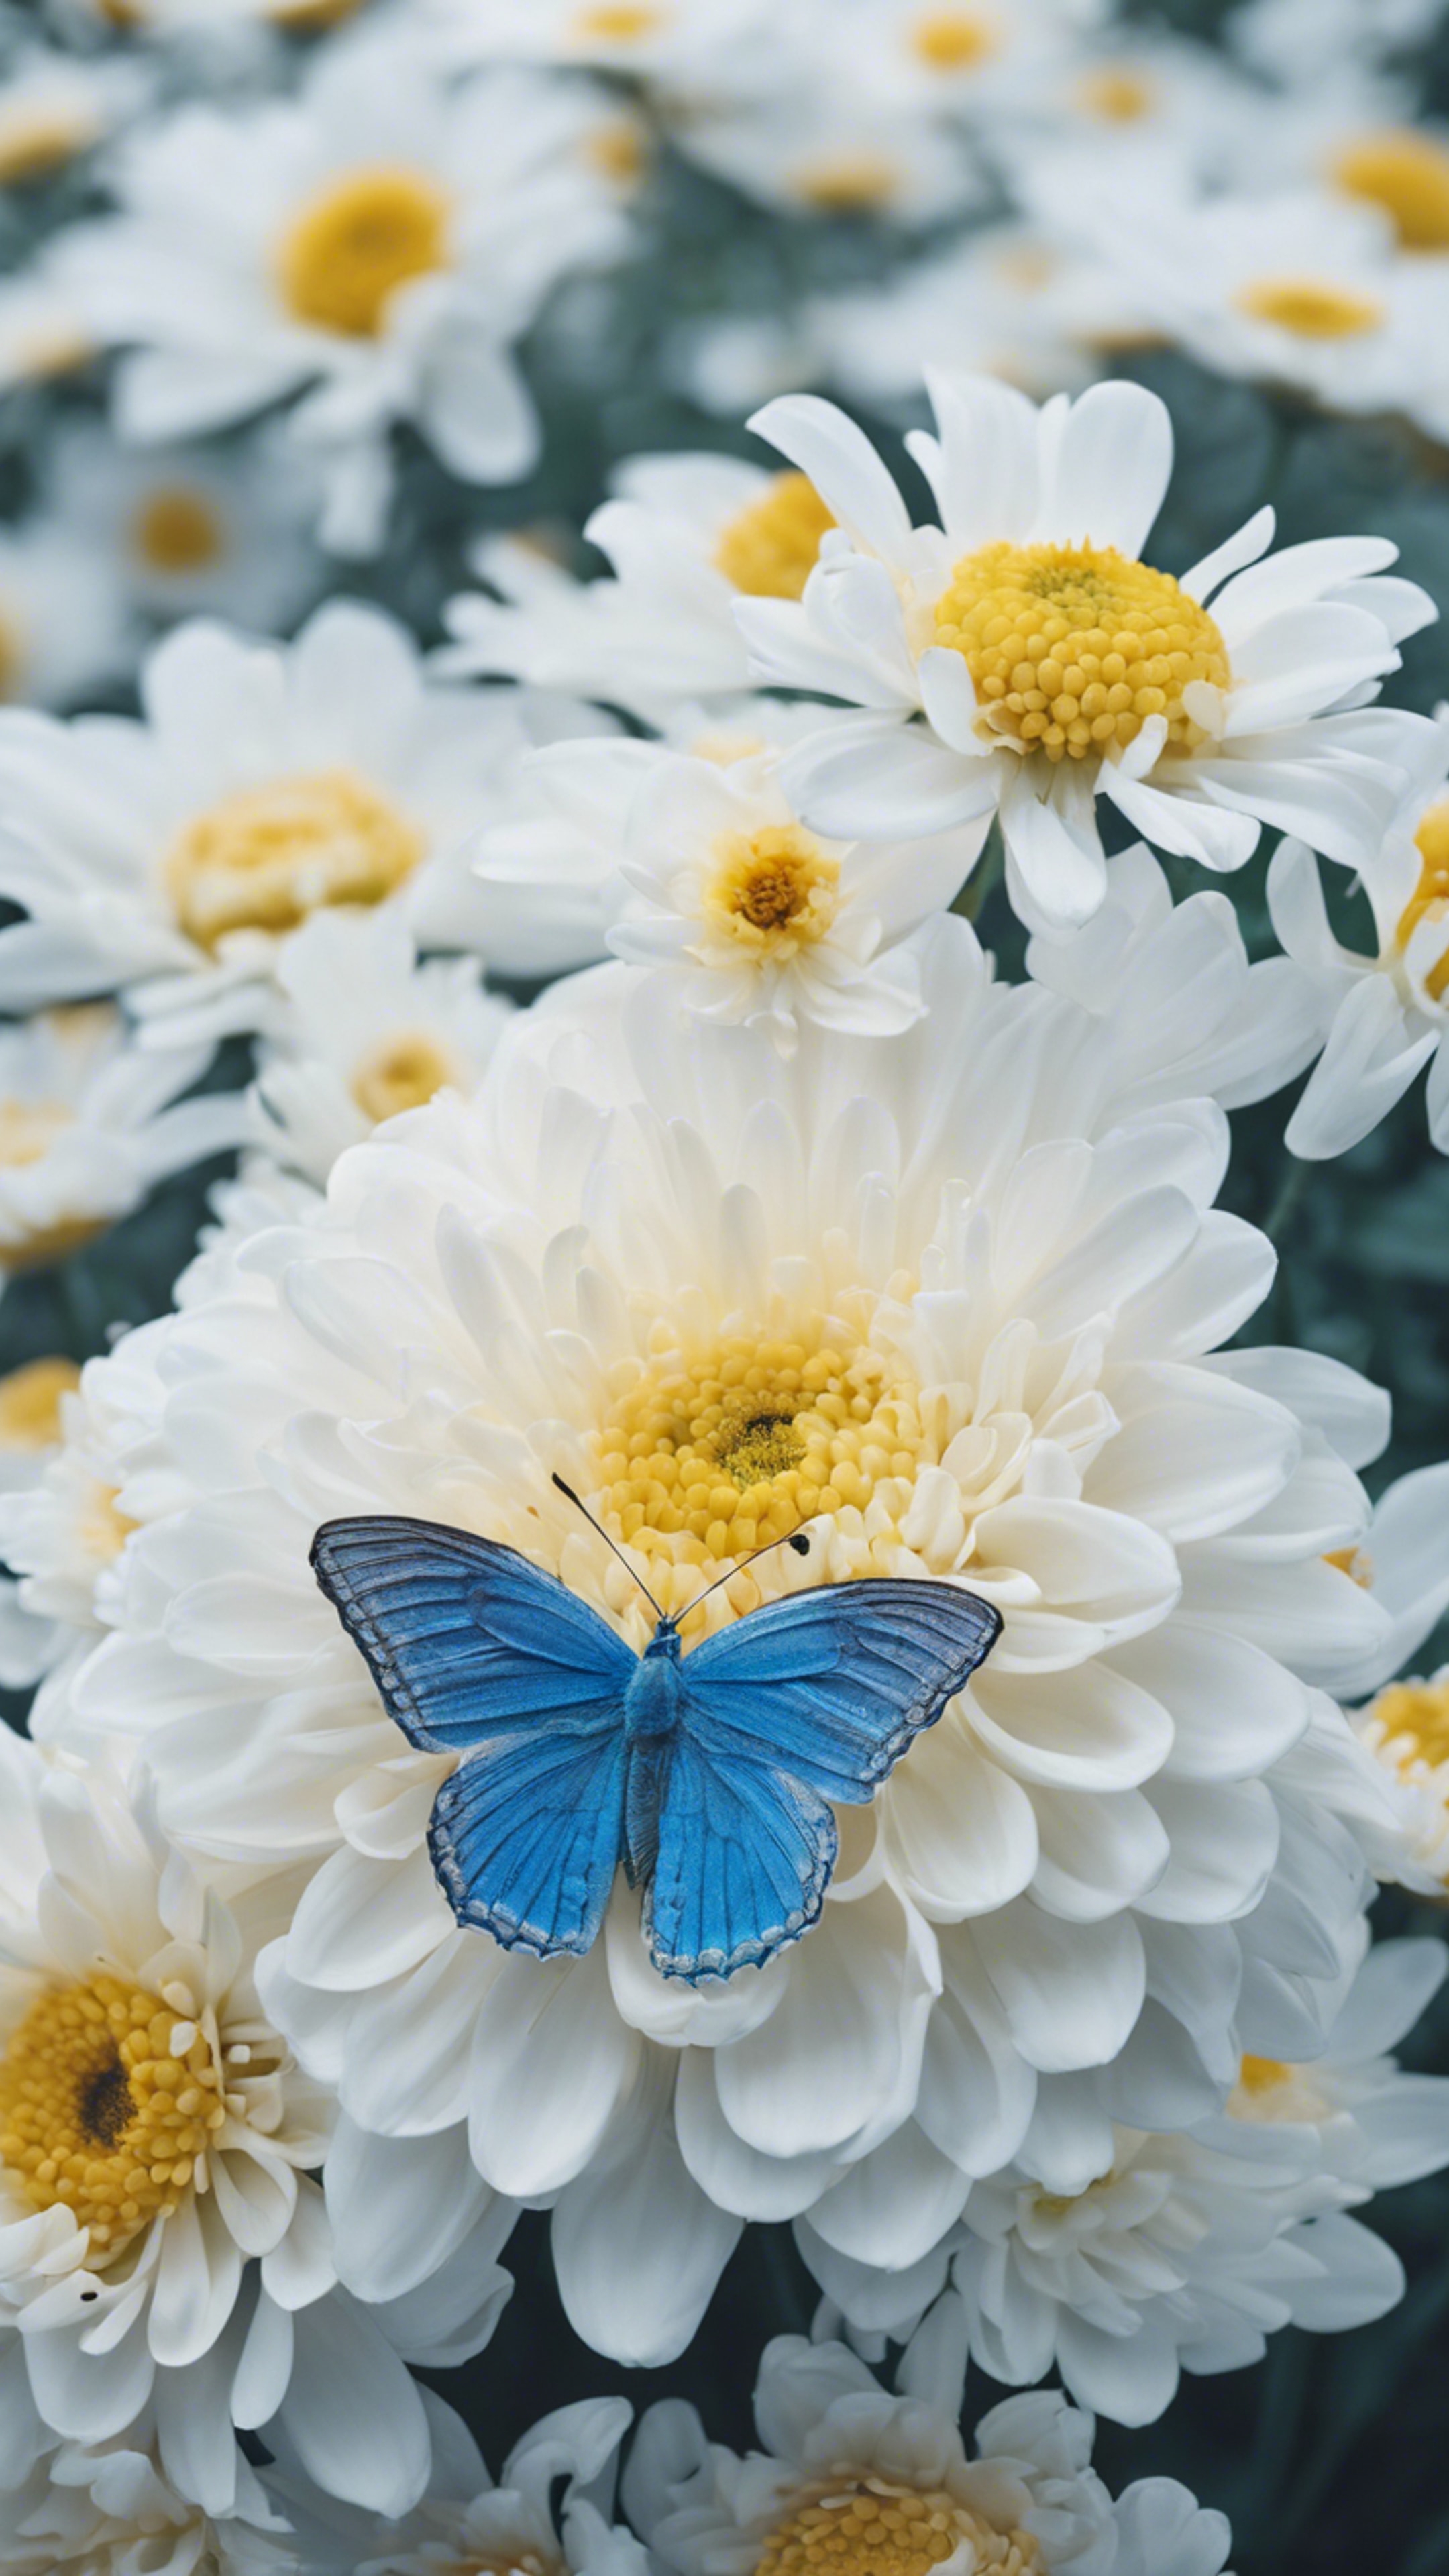 A serene blue butterfly resting on a white chrysanthemum in full bloom.壁紙[c3e7c5c24c154b99a11b]